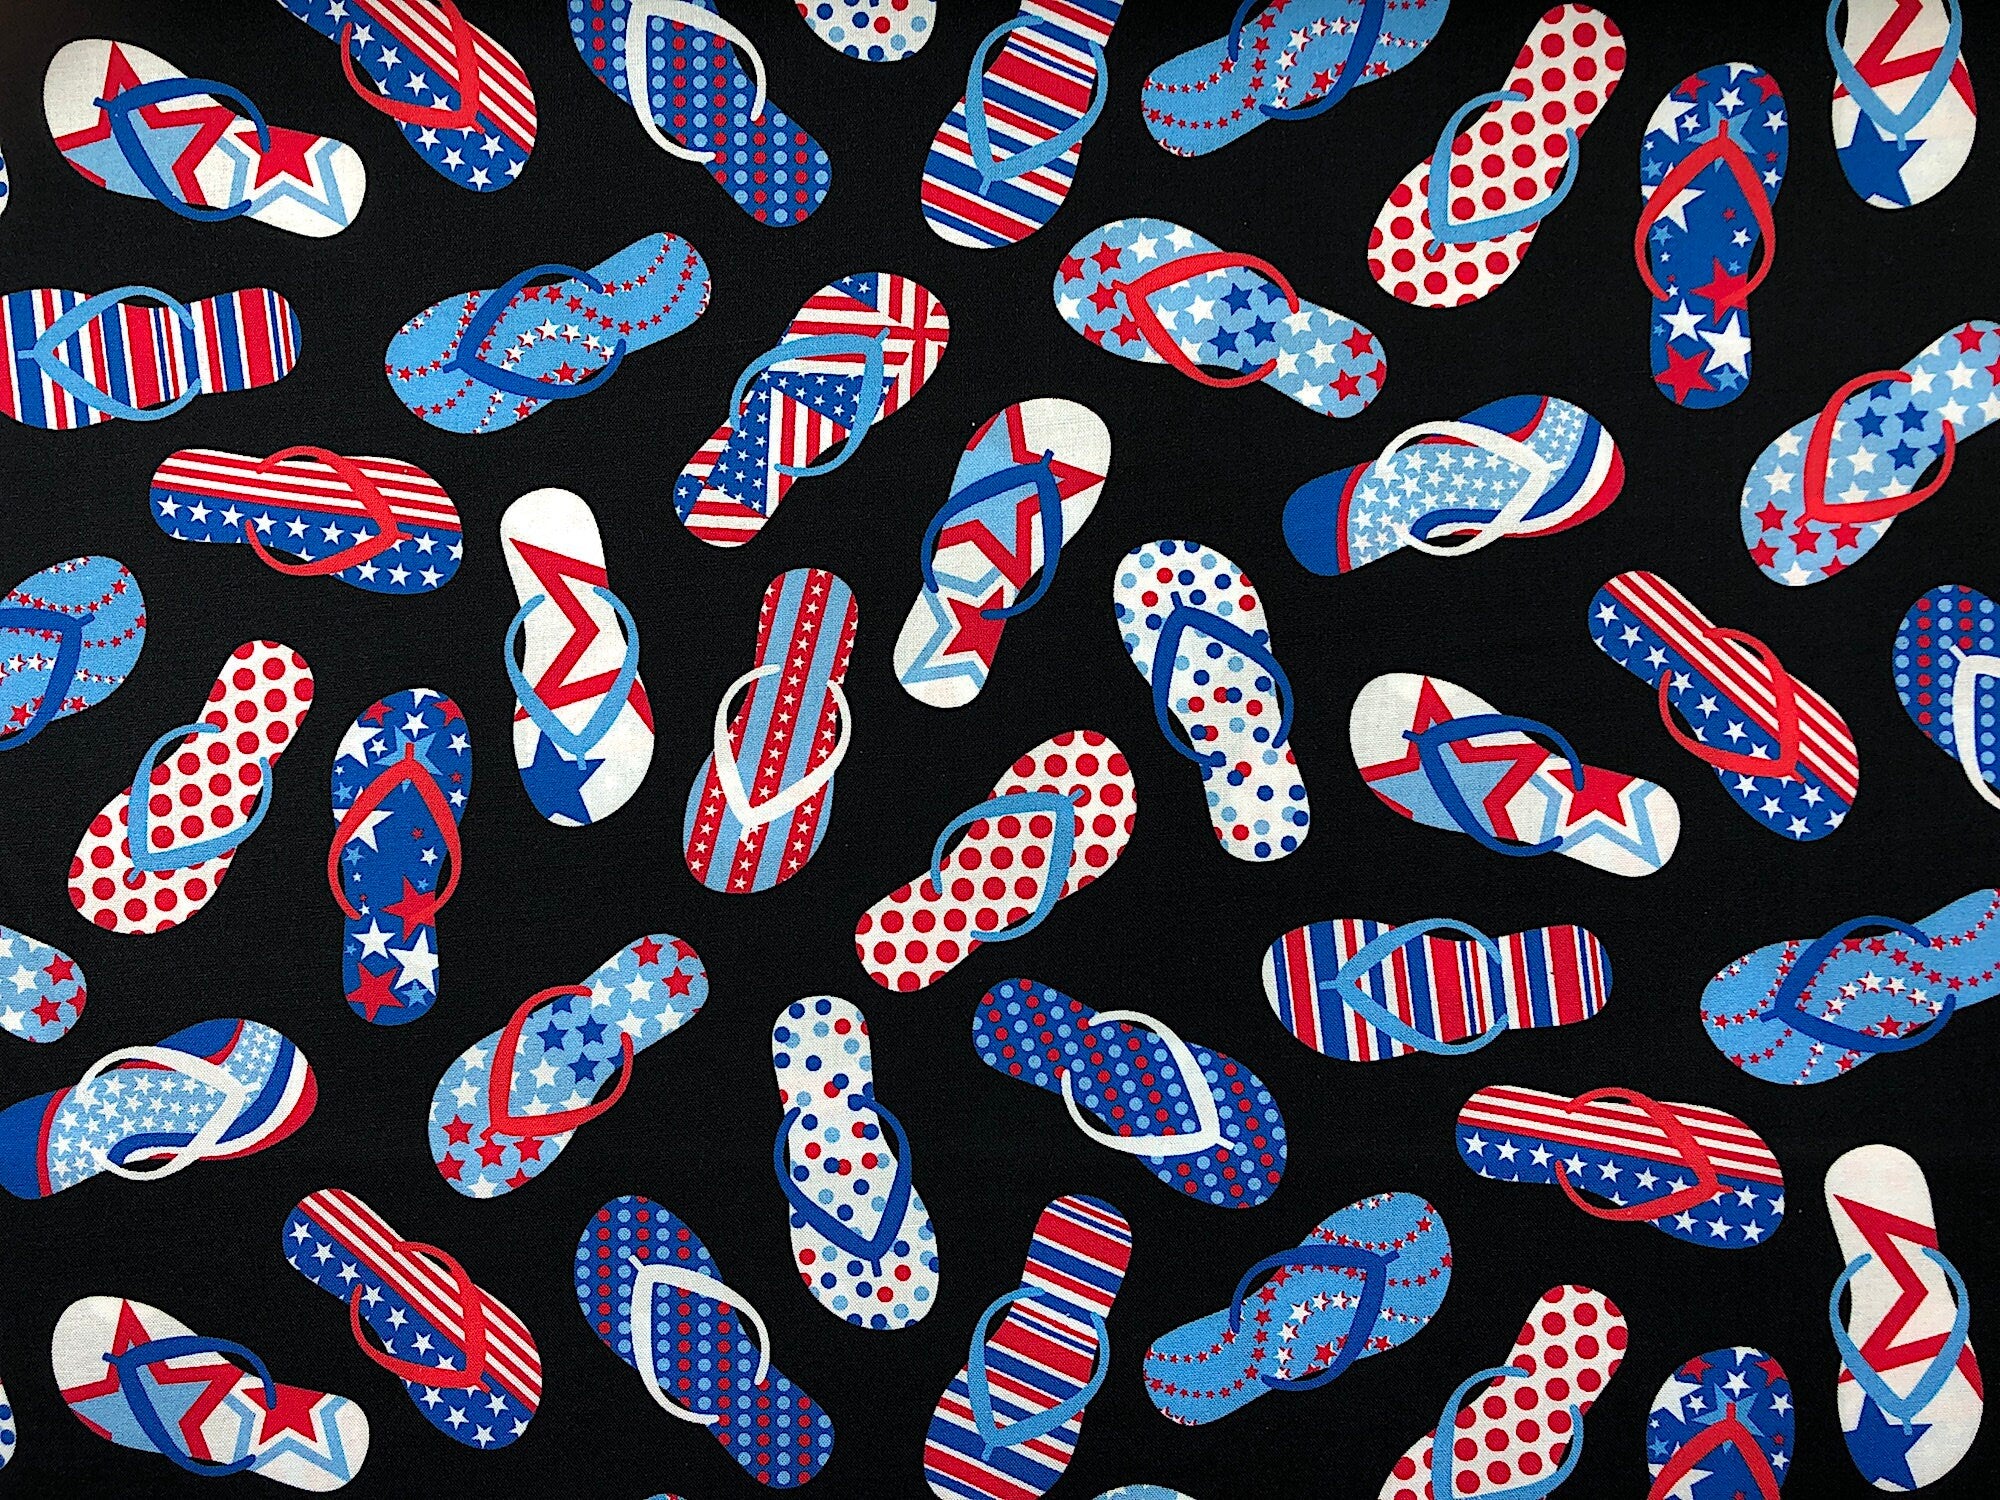 Black cotton fabric covered with flip flops with different red, white and blue designs on them.